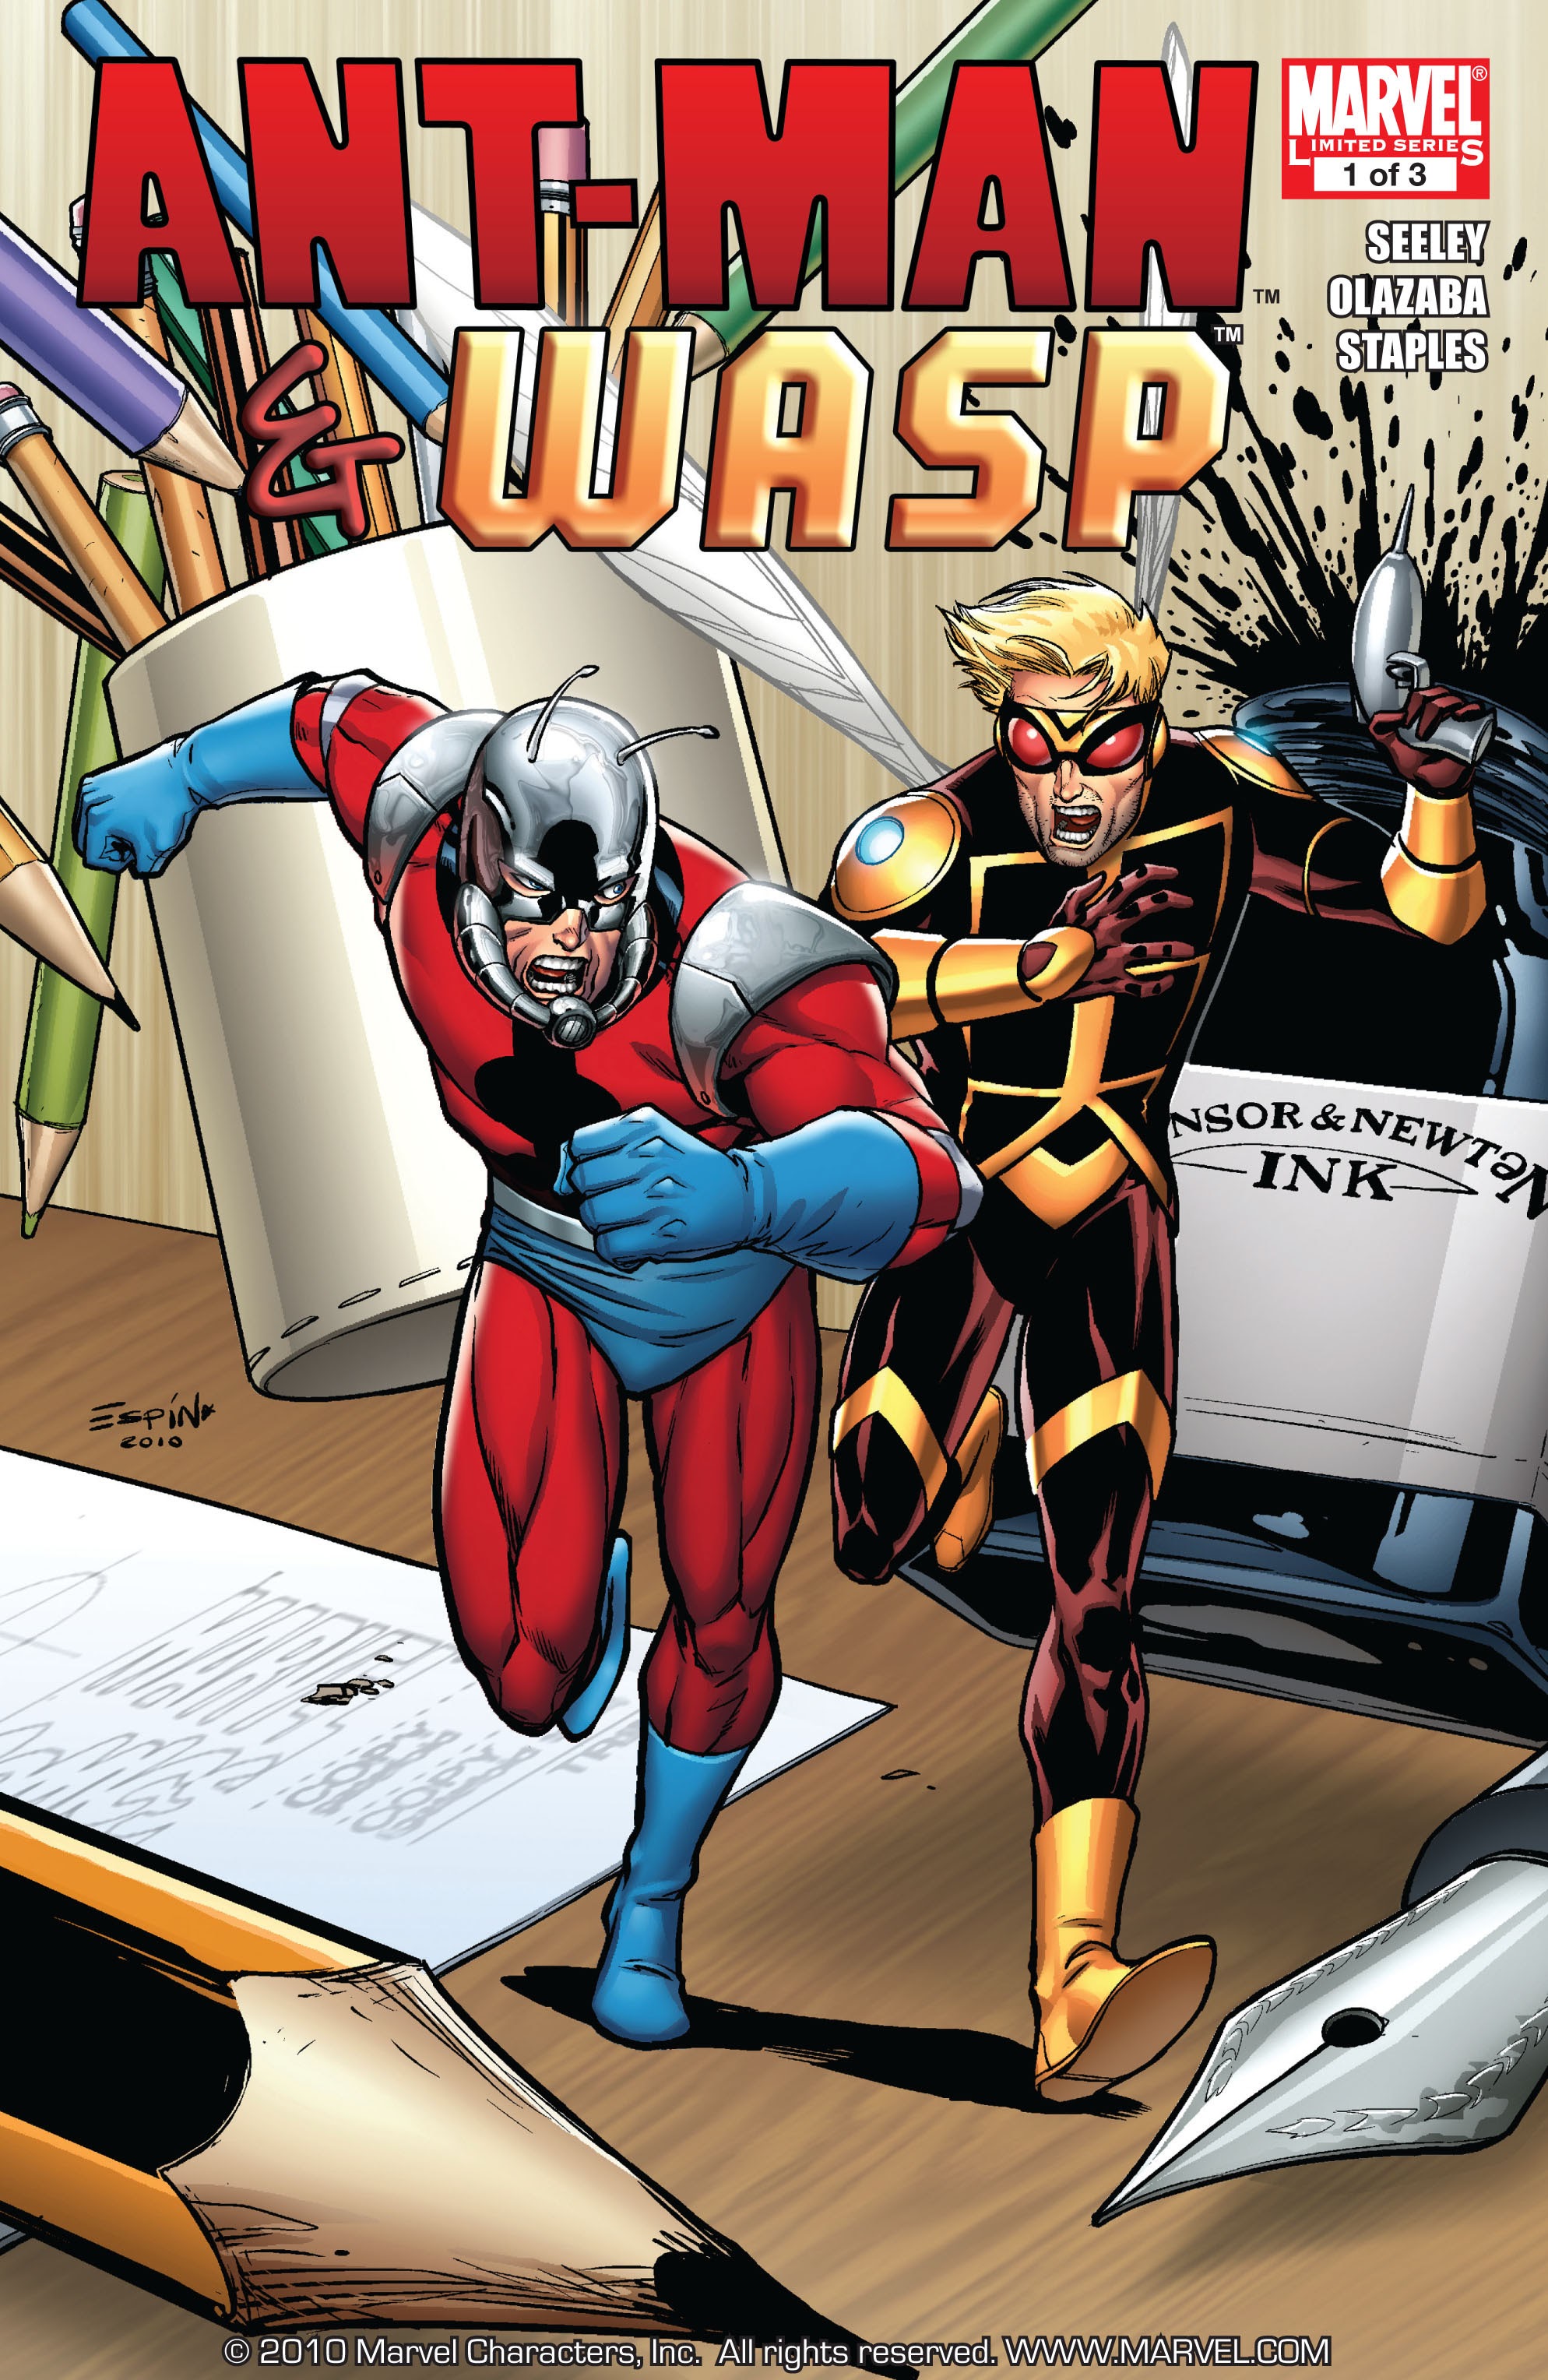 1988px x 3056px - Ant Man Wasp Issue 1 | Read Ant Man Wasp Issue 1 comic online in high  quality. Read Full Comic online for free - Read comics online in high  quality .| READ COMIC ONLINE